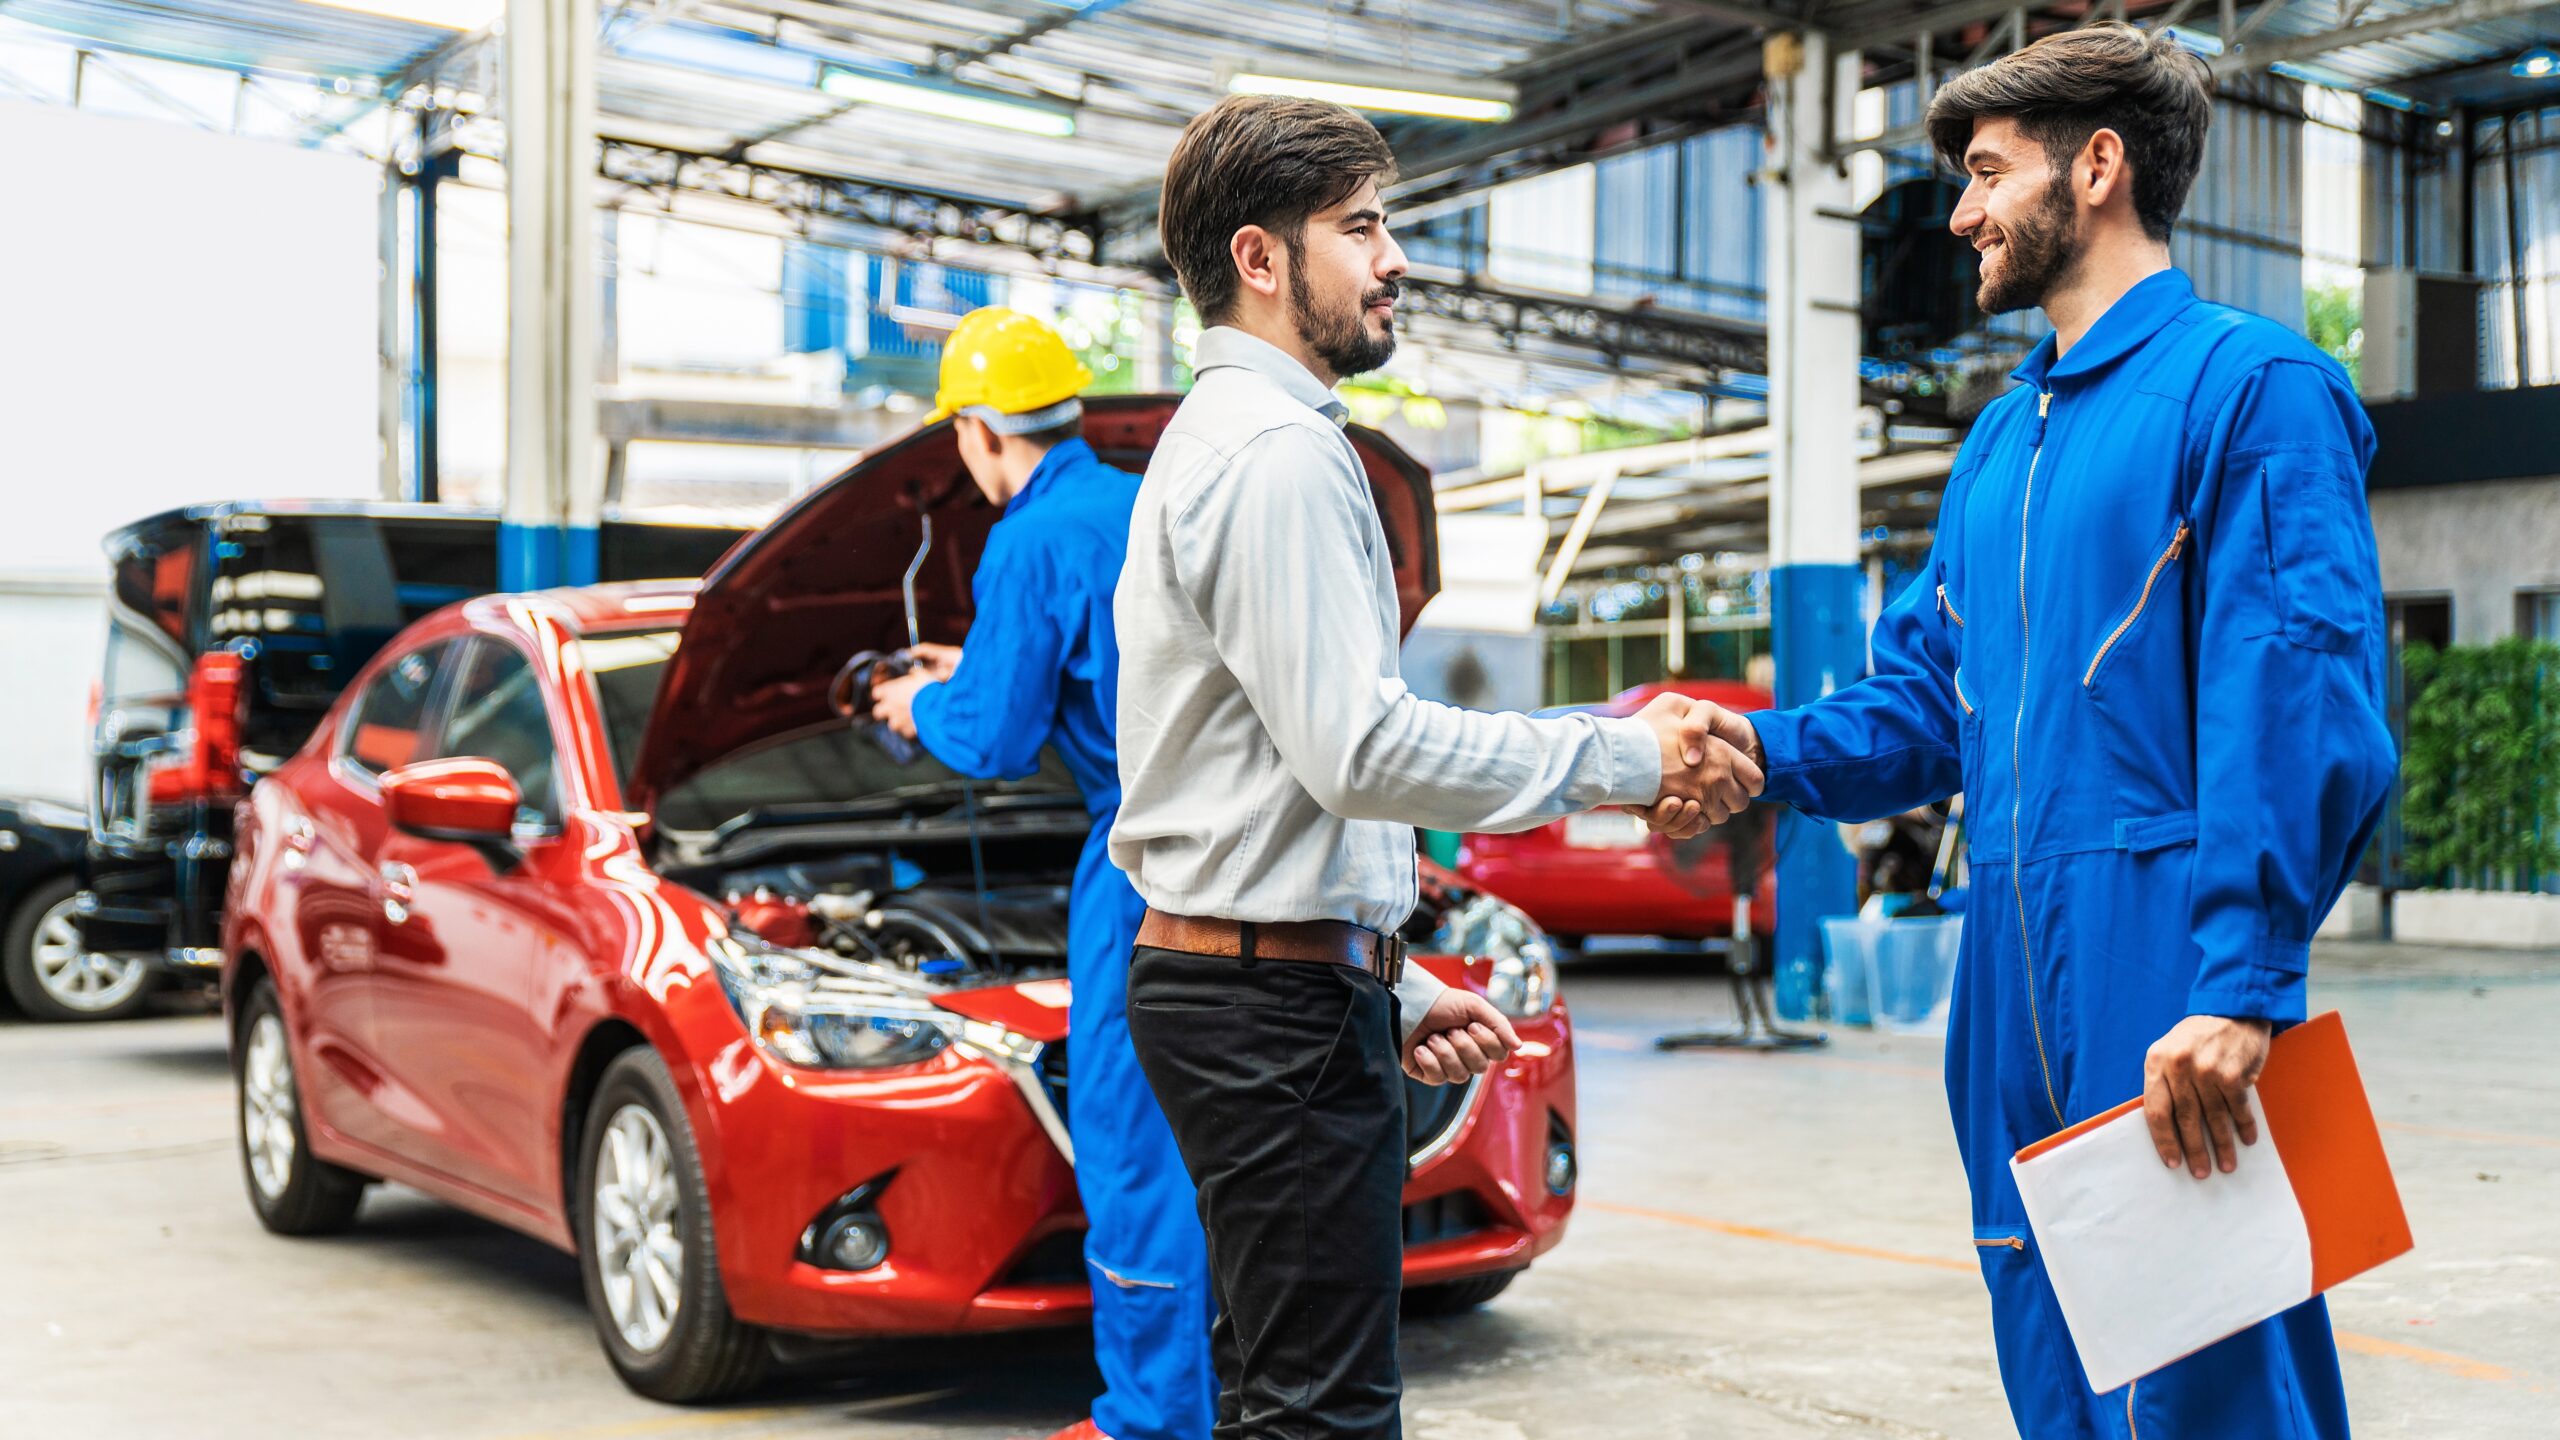 A mechanic is shown shaking hands with a consumer after the vehicles safety checks were completed.